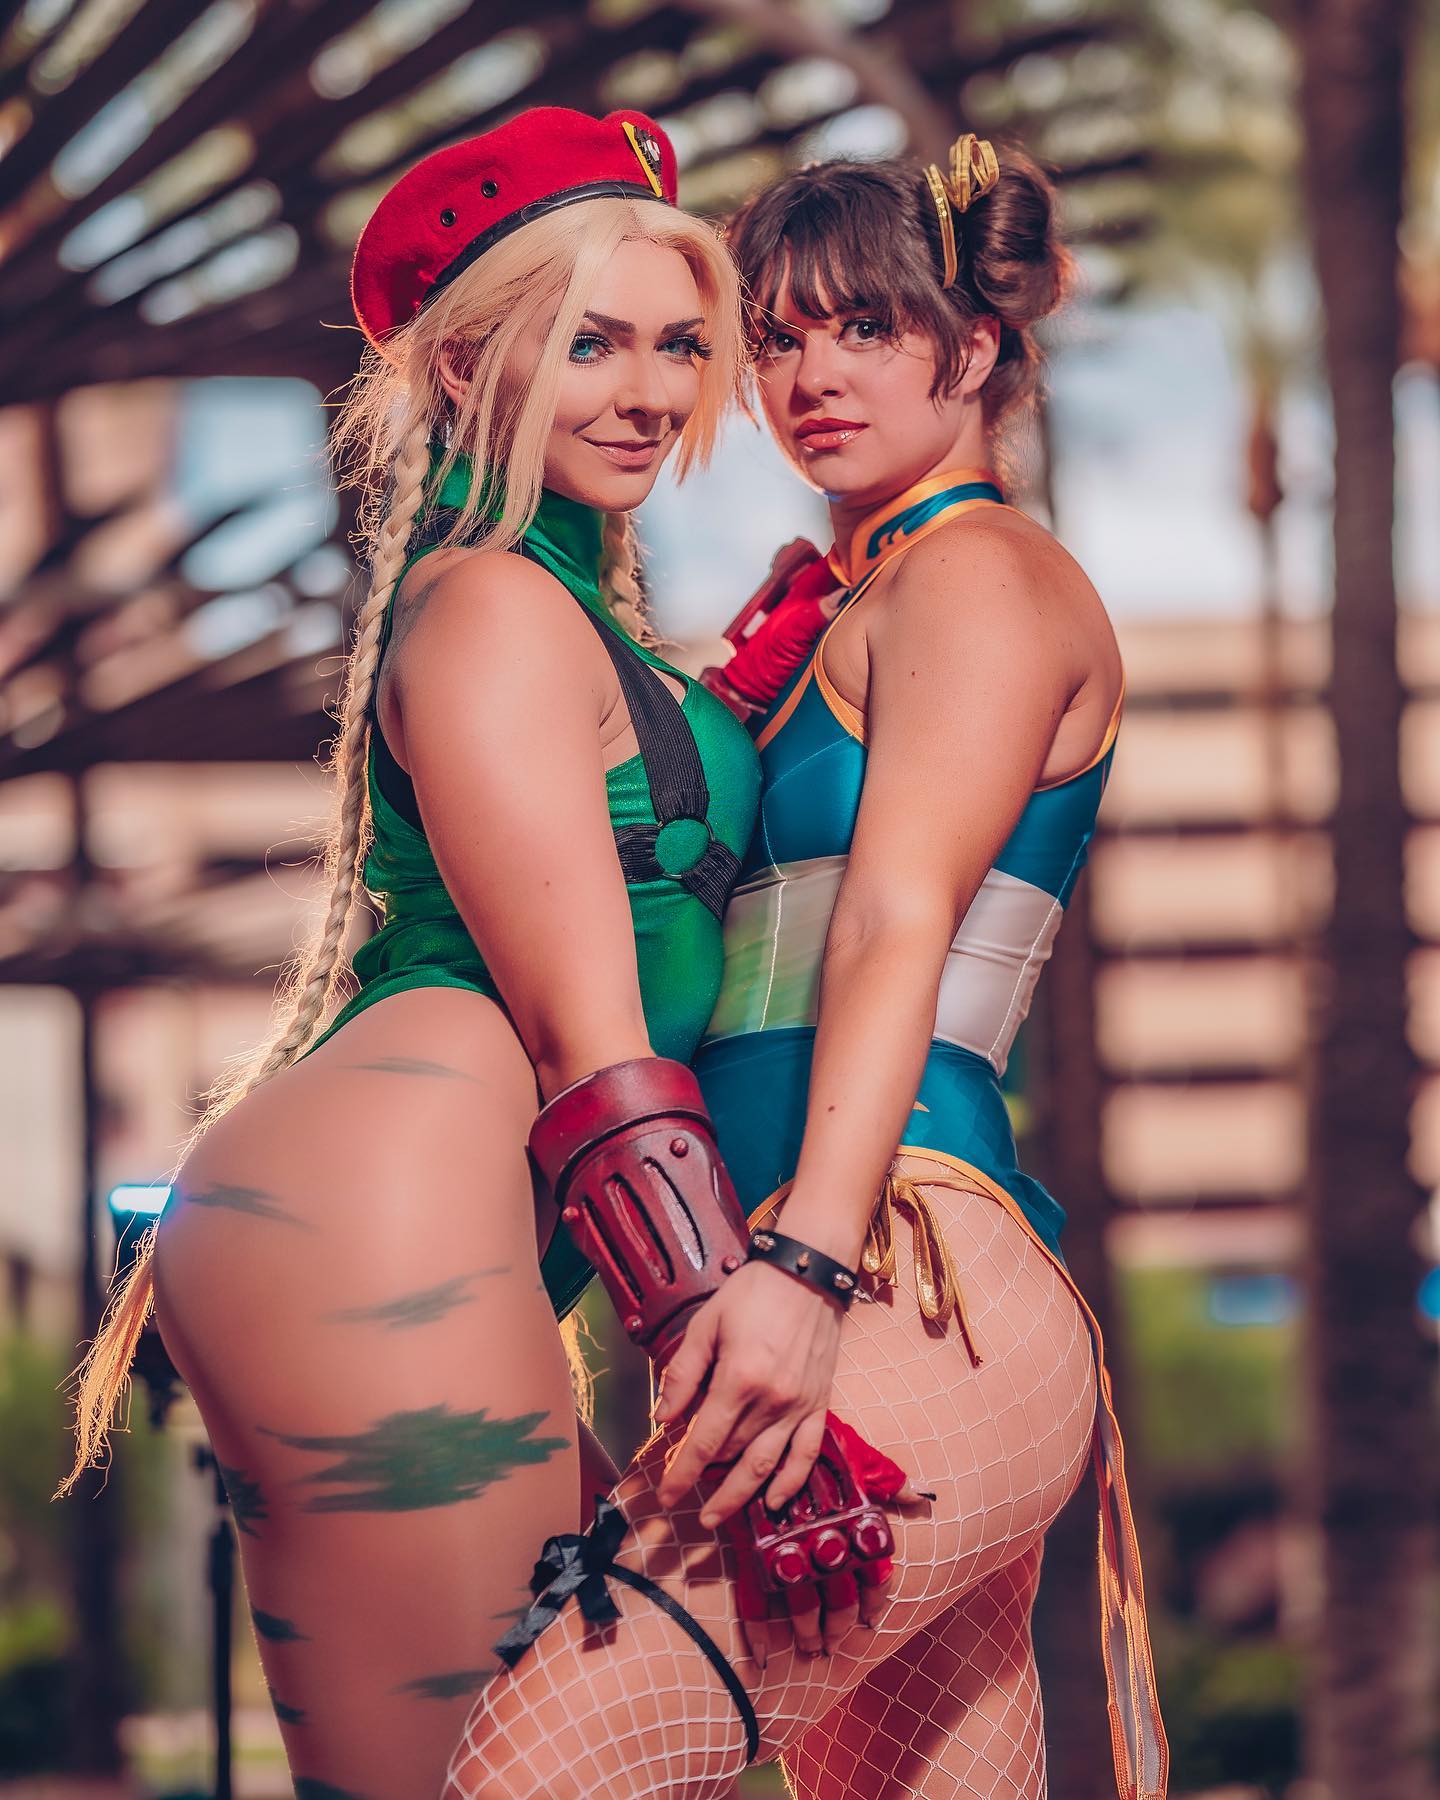 Cammy & chun li from #sabotencon2022 day 1 💙💚
.
Photos by the amazing @courtex.studios 
.
Action shots coming 👀
.
Someone plz fly me back to AZ so I can make more content with these two 🥺 
.
.
.
.
.
.
.
.
.
.
.
.
.
TAGS:
#twitch #twitchtv #twitchaffiliate #twitchstreamer #stream #streaming #streamer #gamer #gamergirl #animegirl #egirl #girlgamer #game #gamerlife #pokemon #cosplay #cosplaygirl #cos #lgbt #bi #playstation #videogames #streetfights #streetphotography #cammy #chunlicosplay #chunli #model #colab